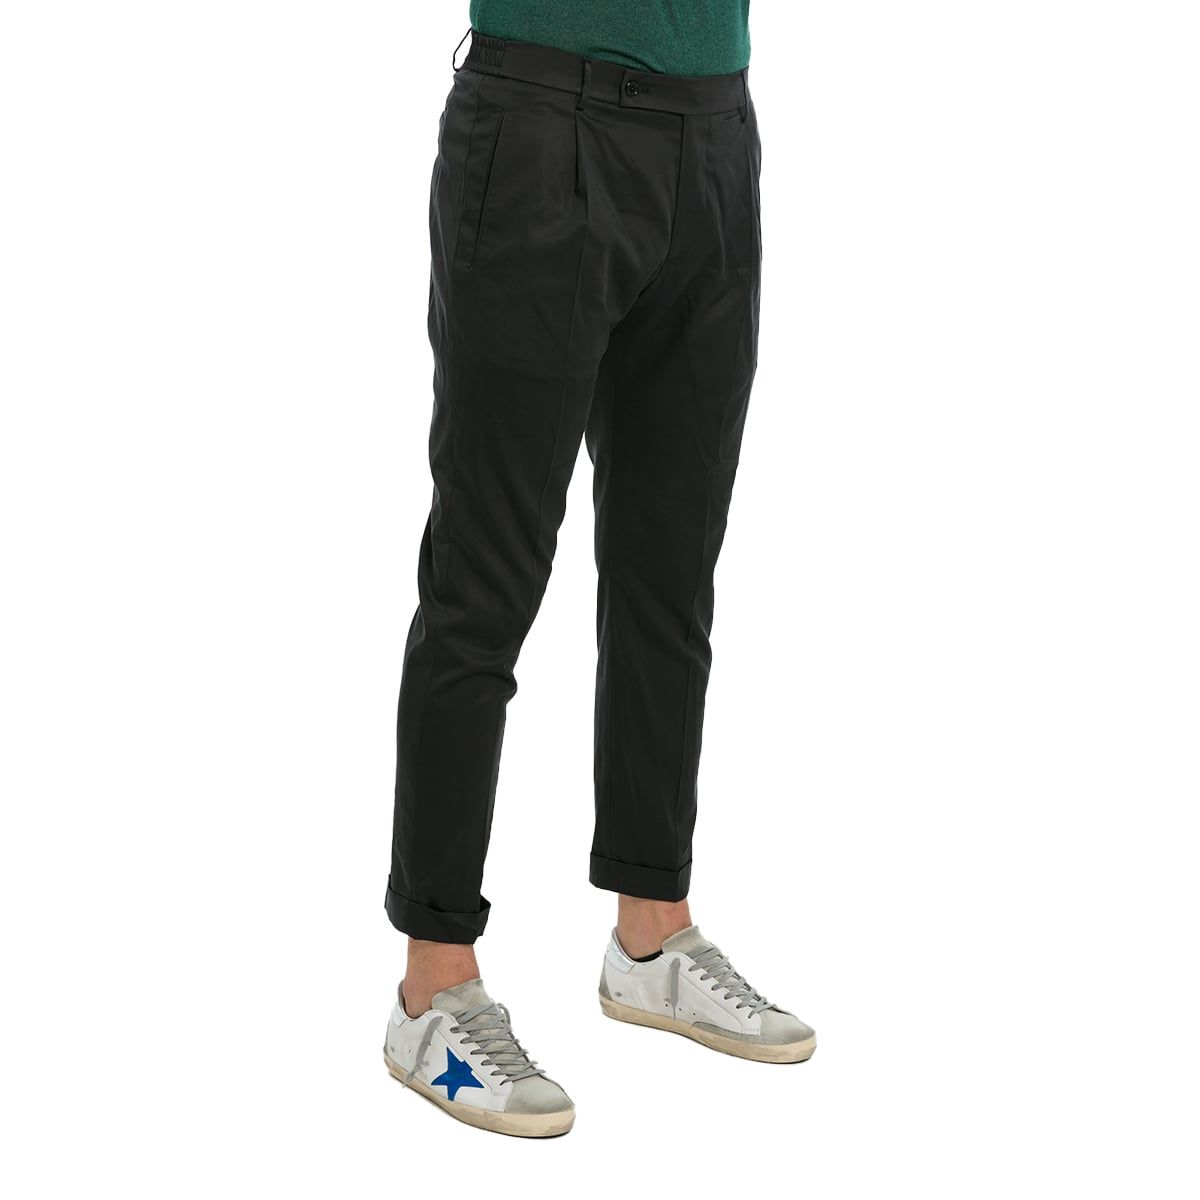 Black Twill Flat Front Trousers